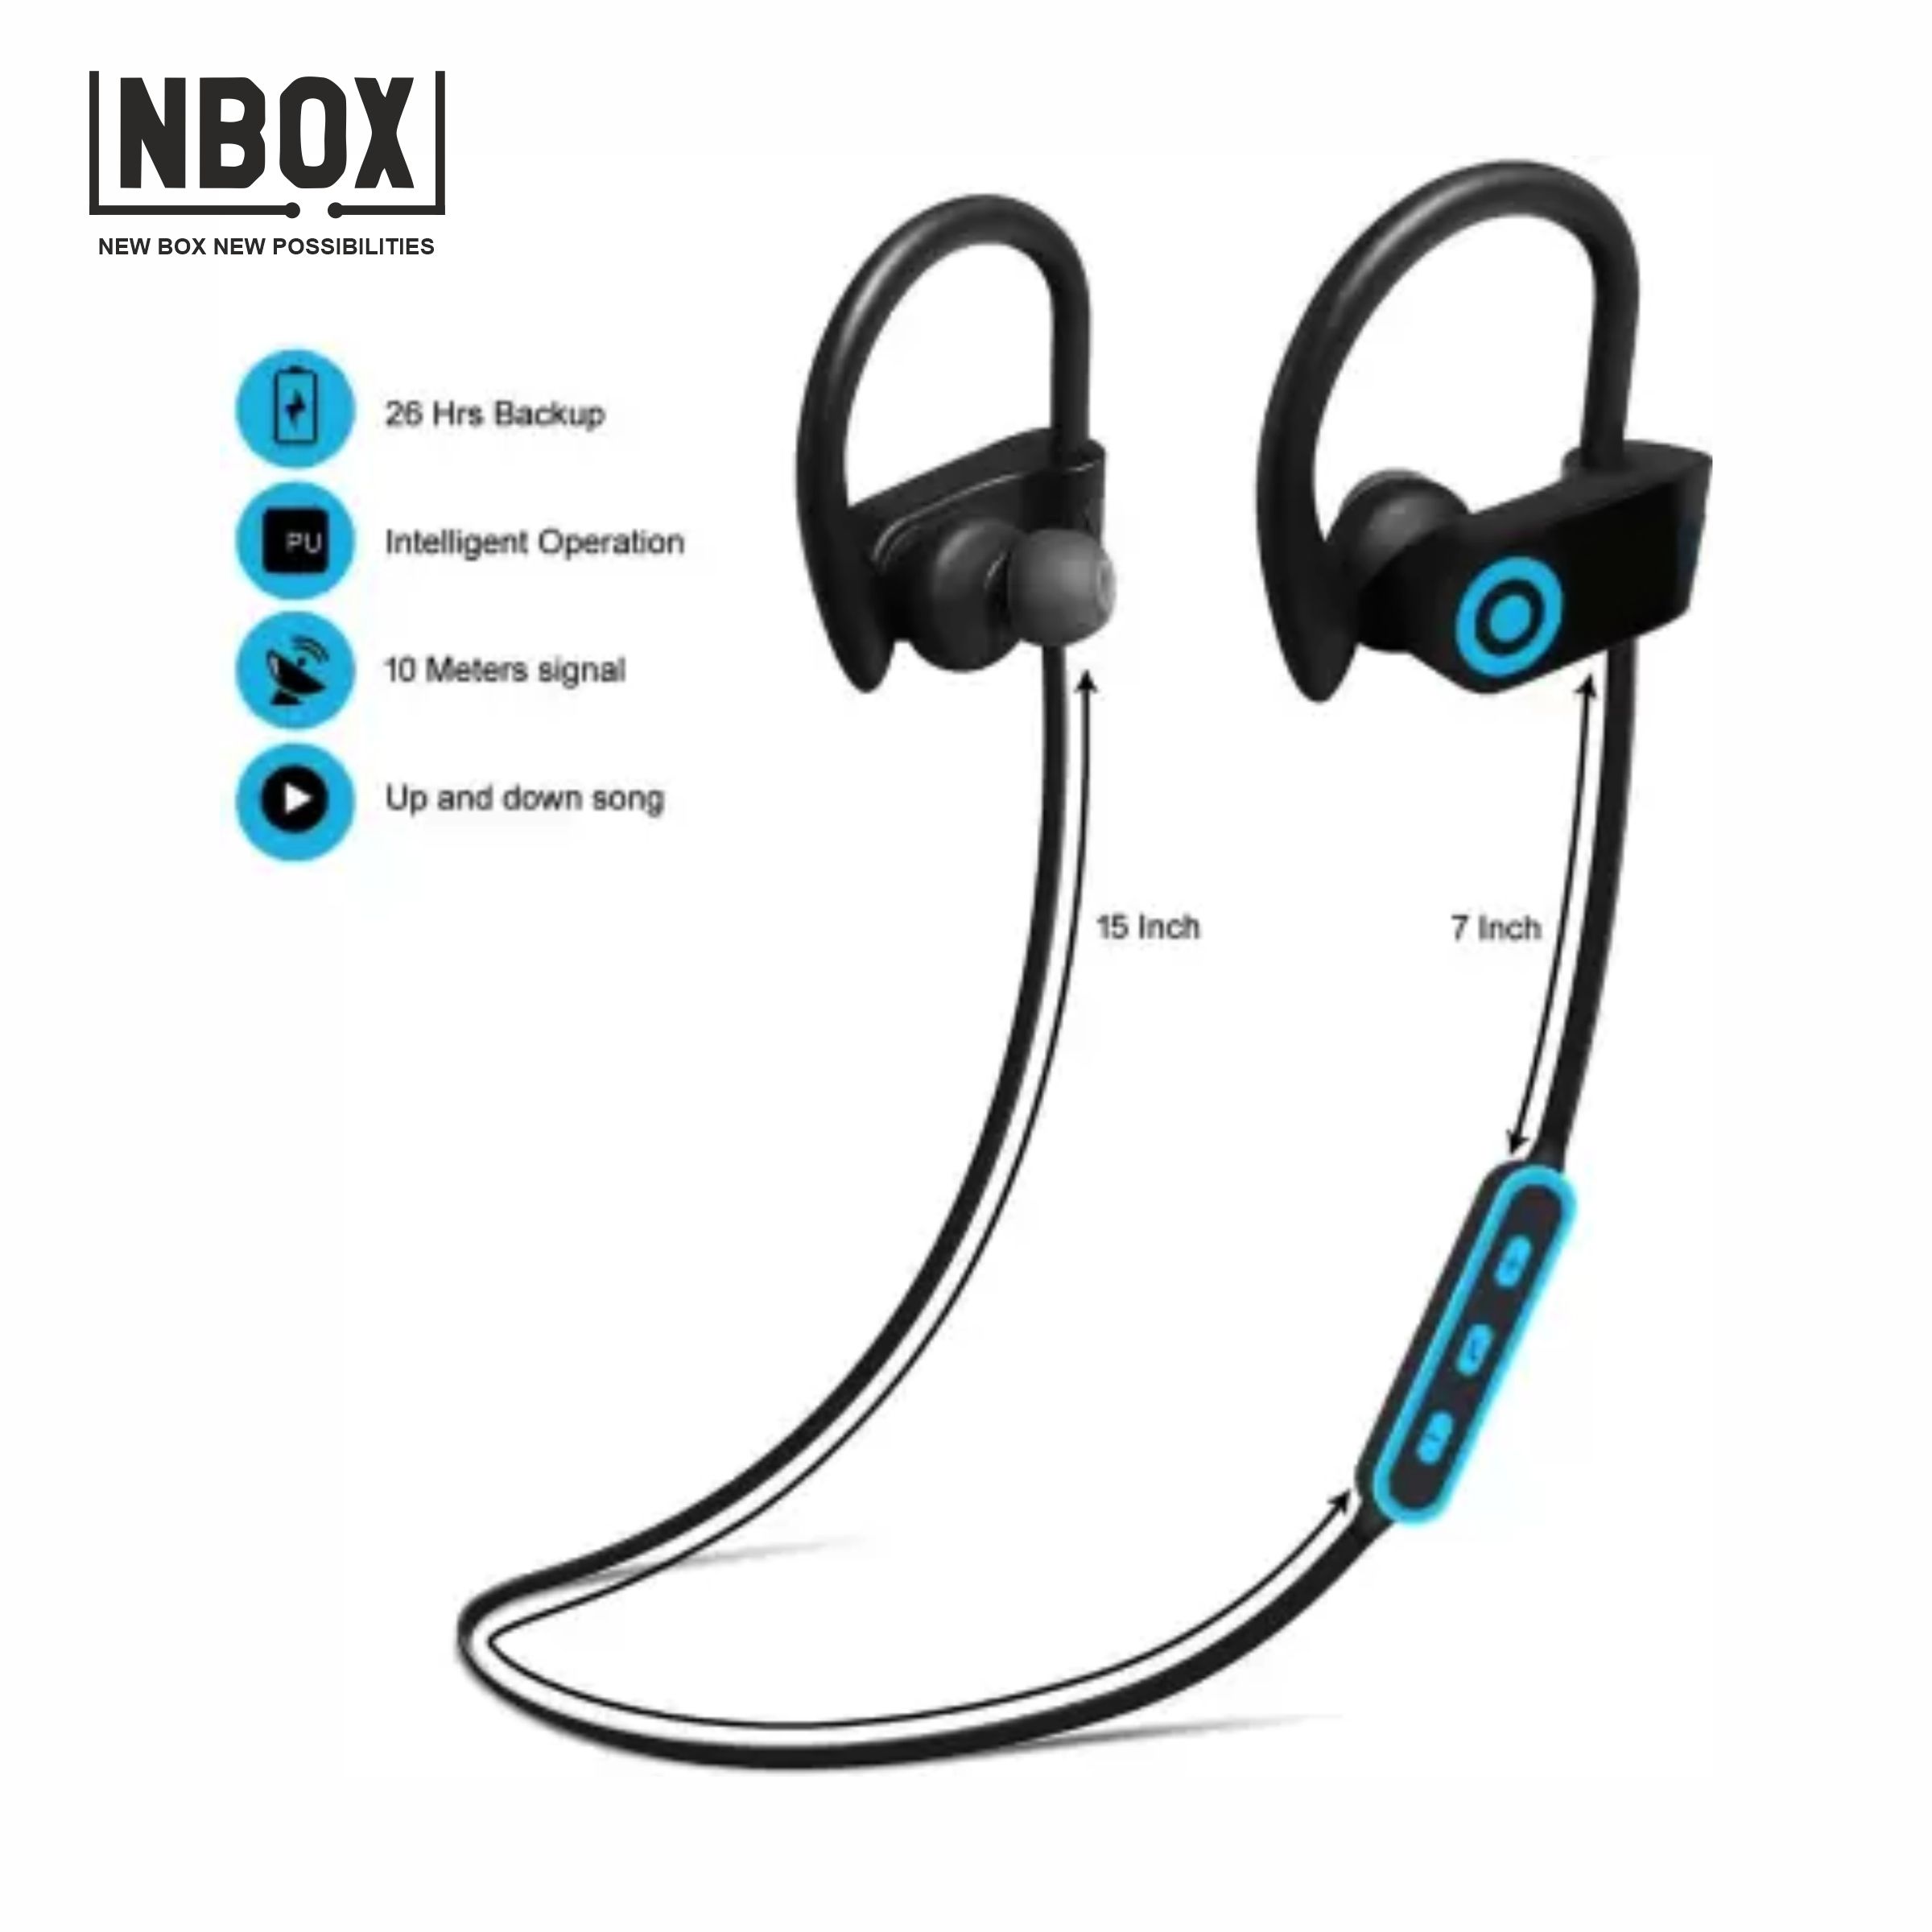 NBOX VBT-1949 Blue In Ear Bluetooth Neckband 12 Hours Playback IPX4(Splash & Sweat Proof) Passive noise cancellation -Bluetooth Blue